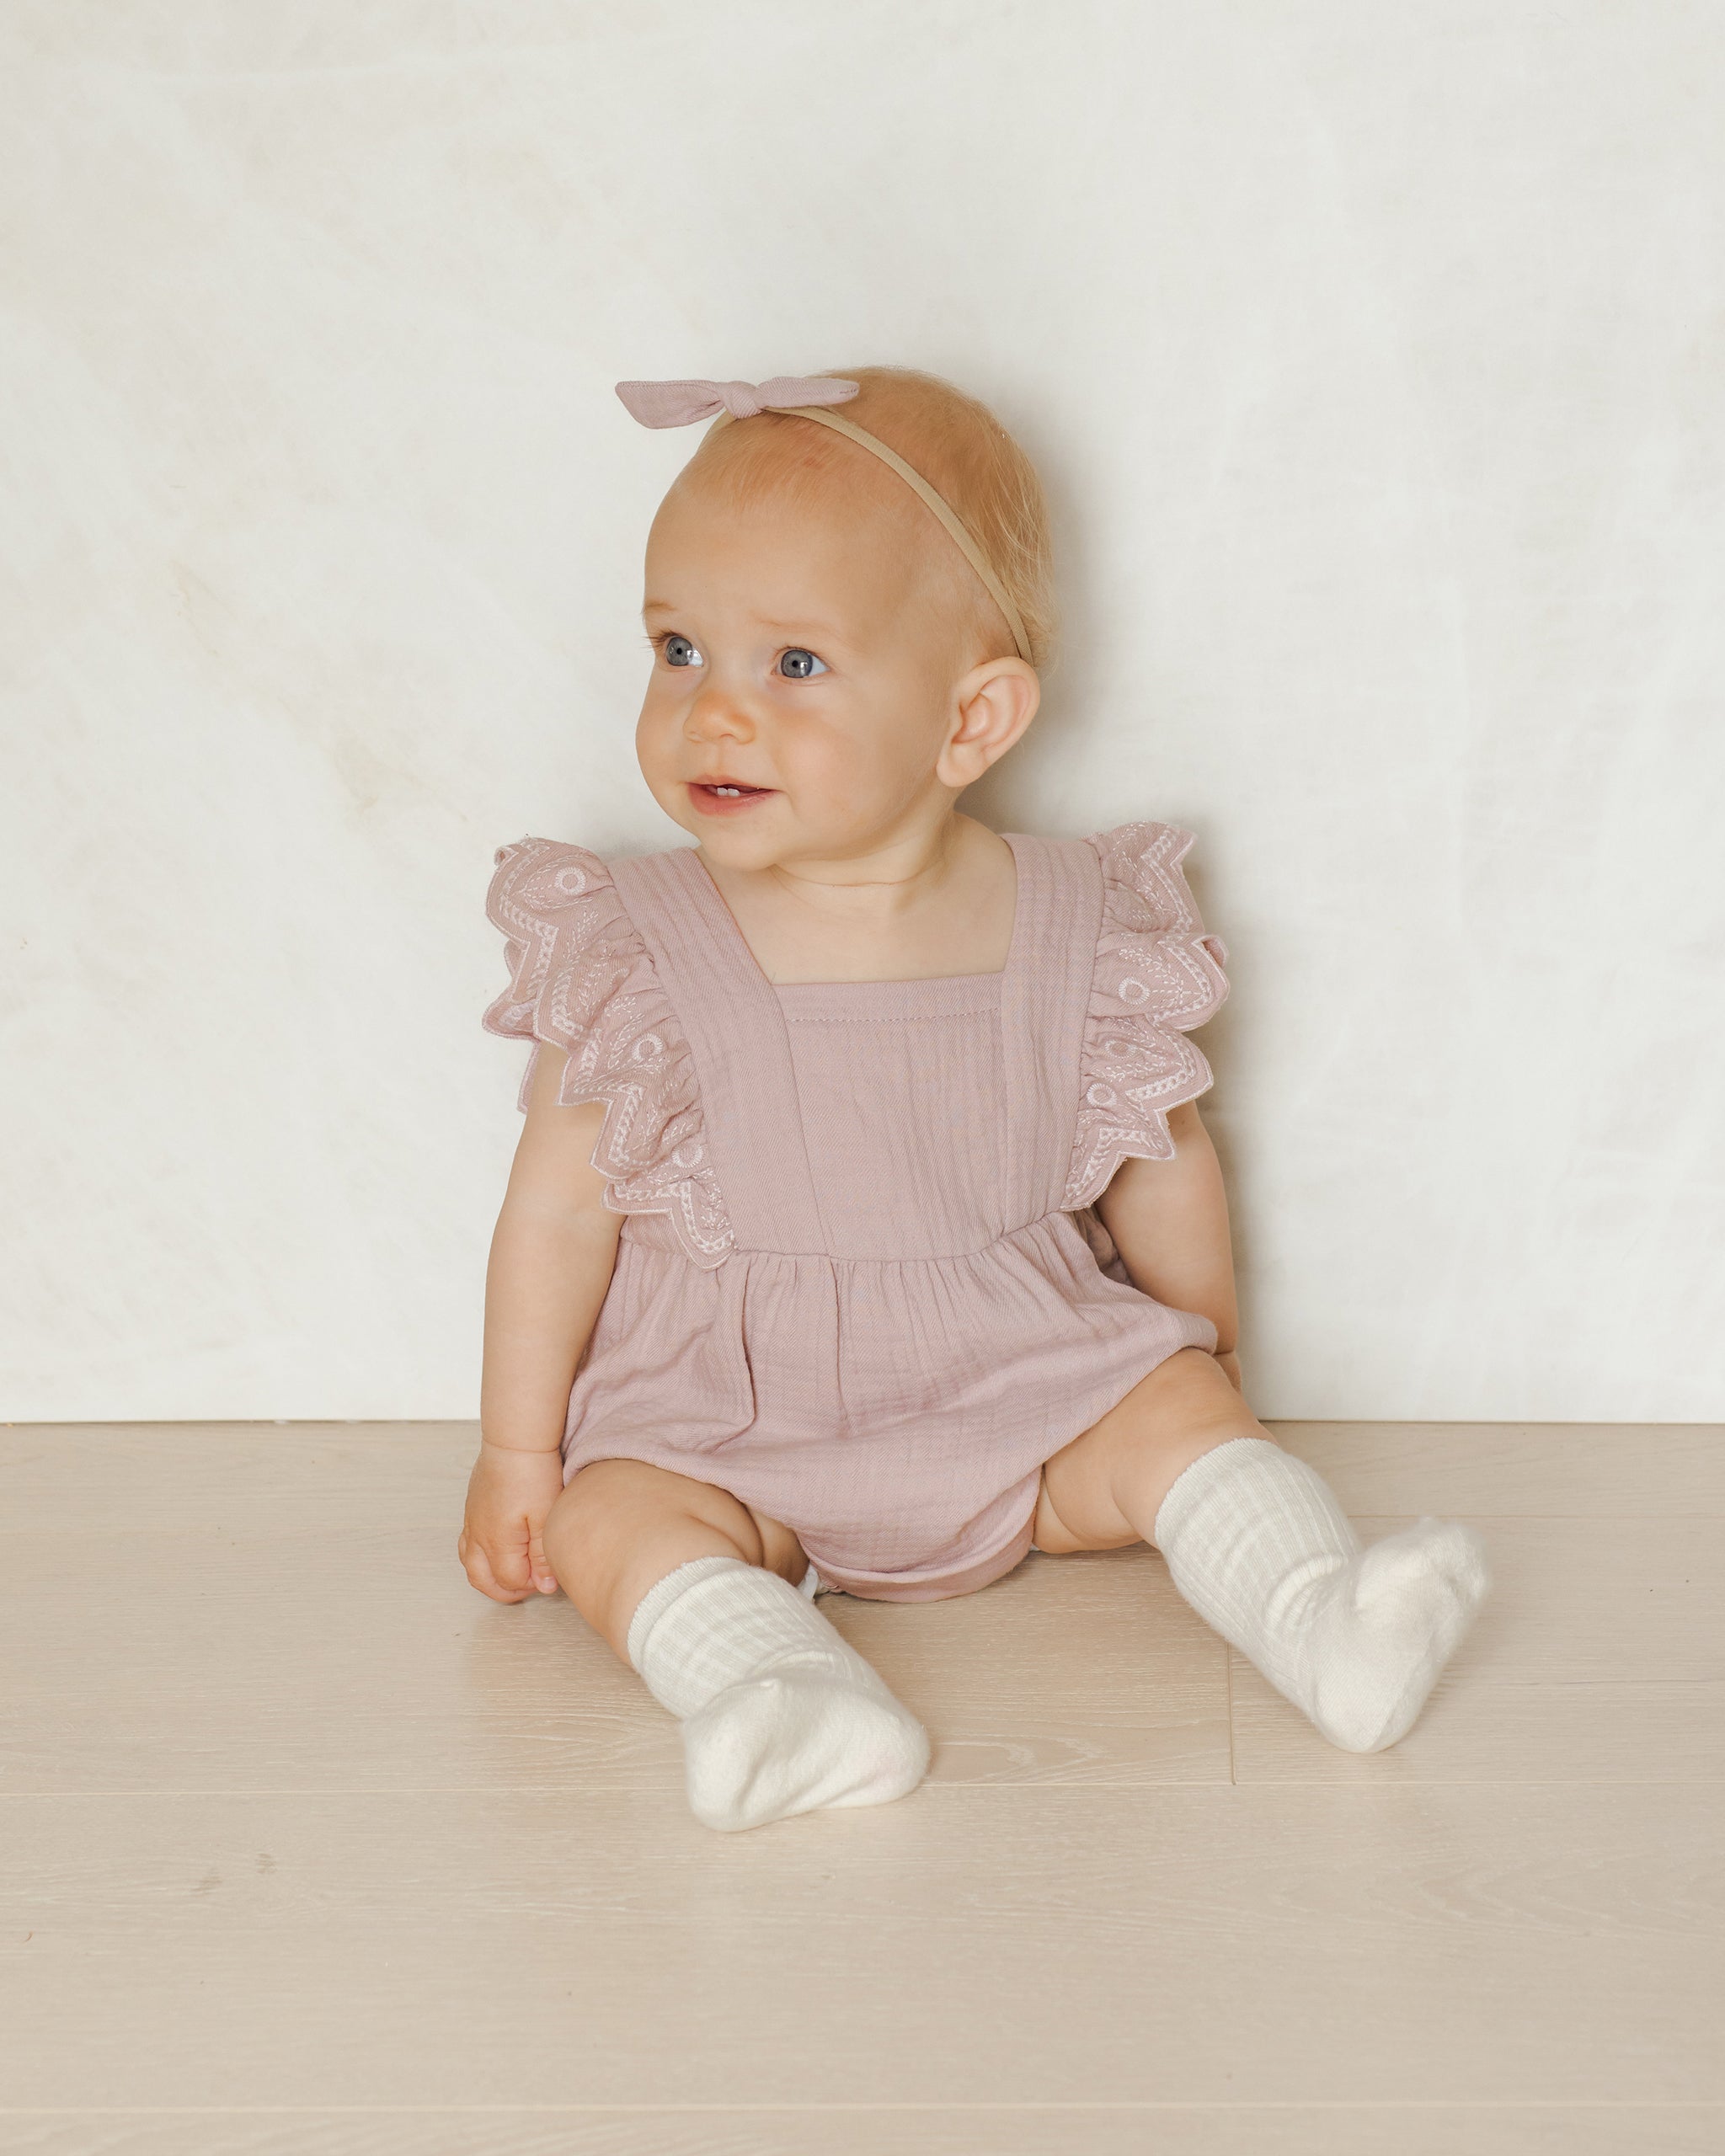 Naomi Romper || Lavender - Rylee + Cru | Kids Clothes | Trendy Baby Clothes | Modern Infant Outfits |